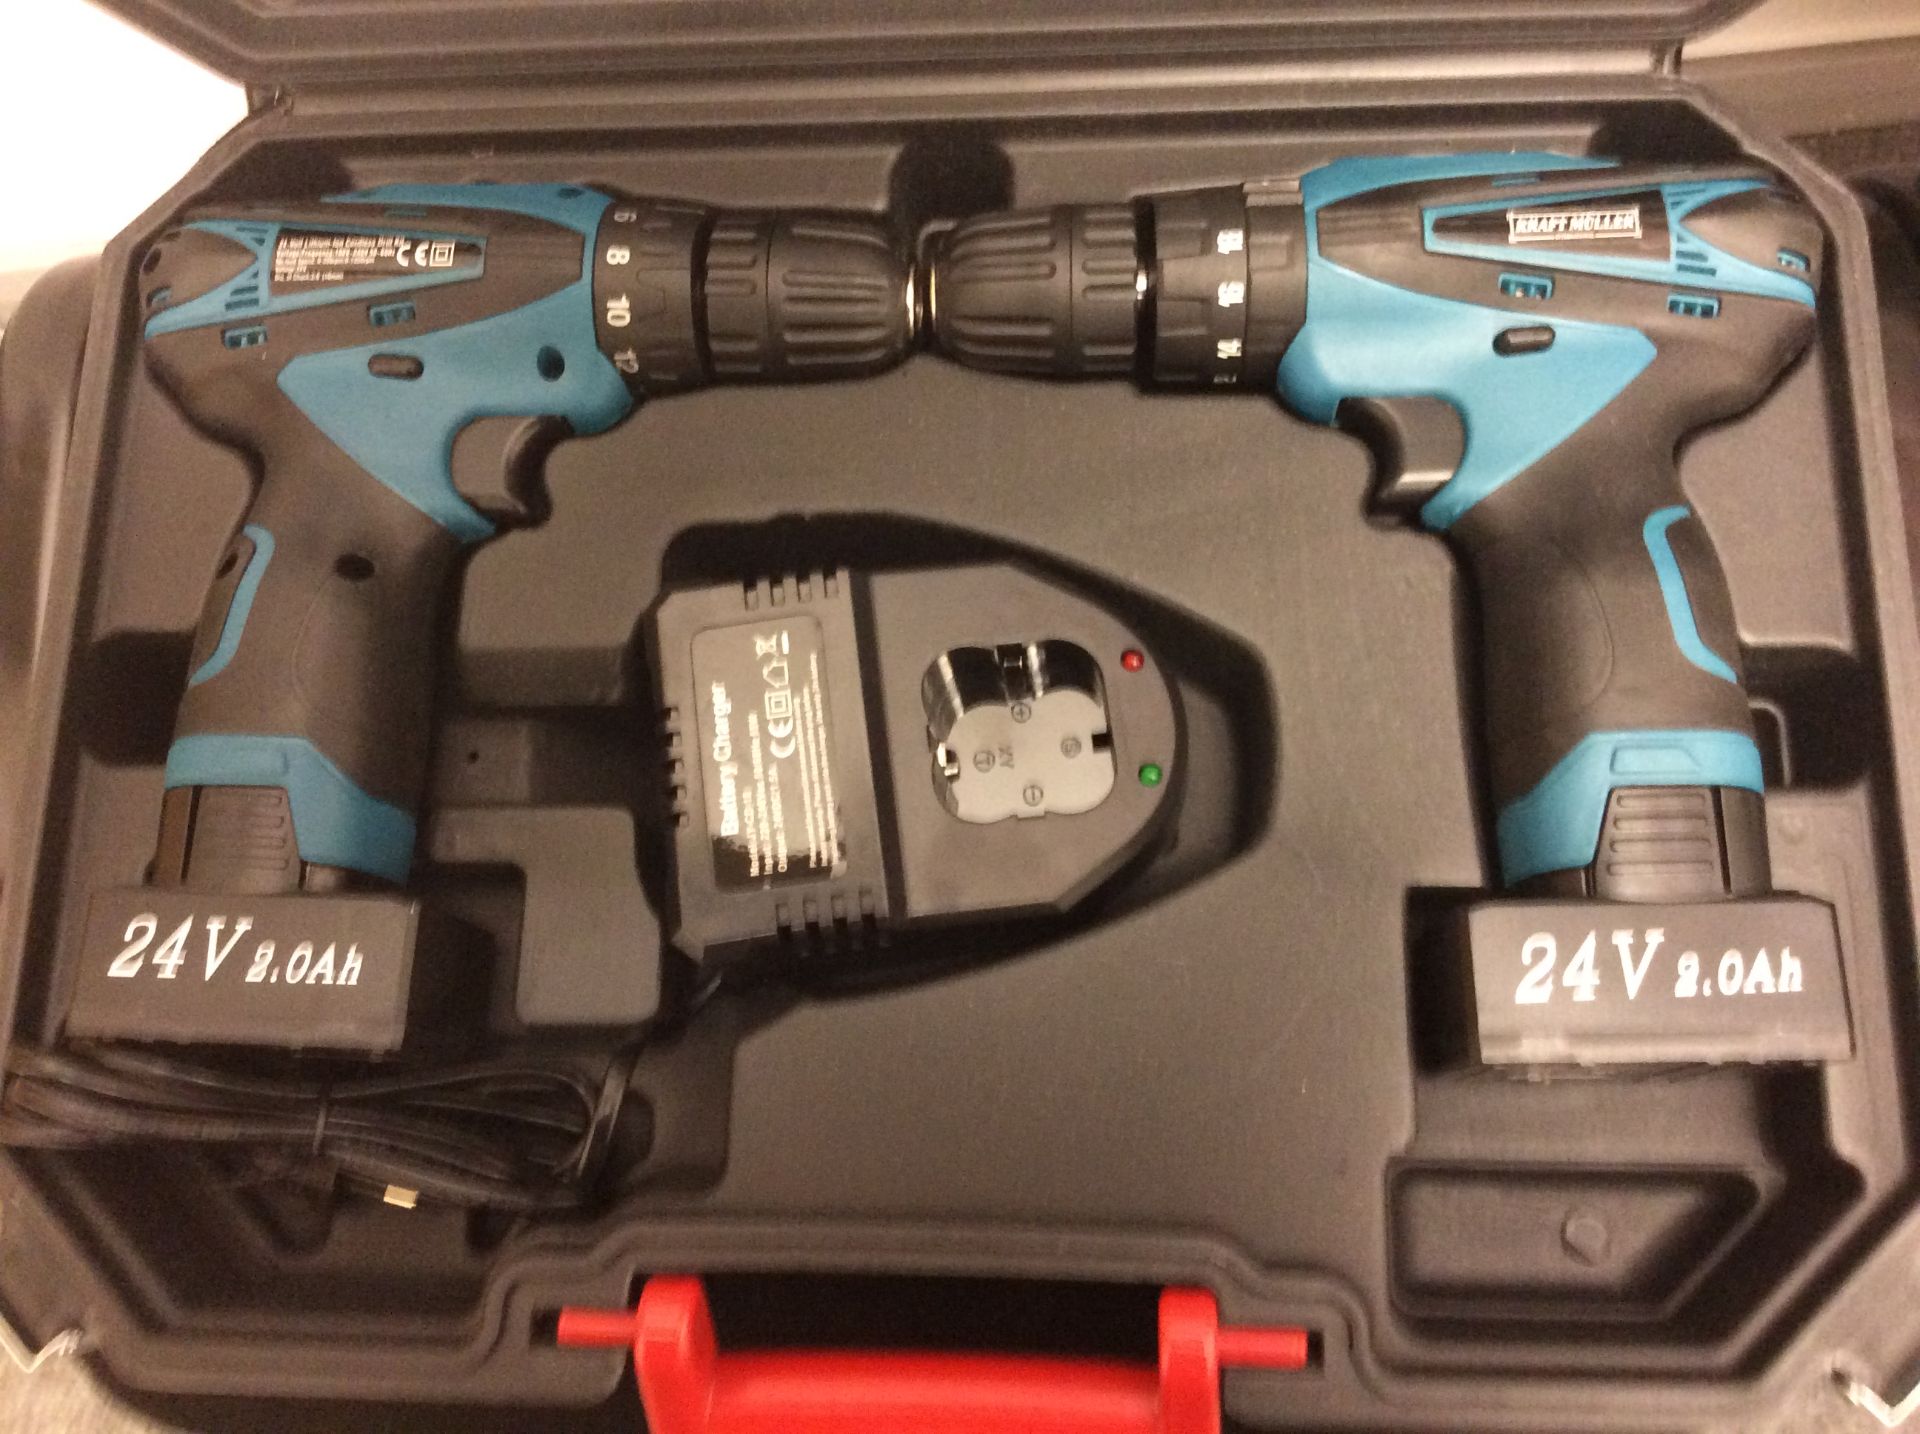 V Brand New Lithium-ion Cordless 24 volt Drill Set In Carry Case With Keyless Chuck - Impact Setting - Image 2 of 3